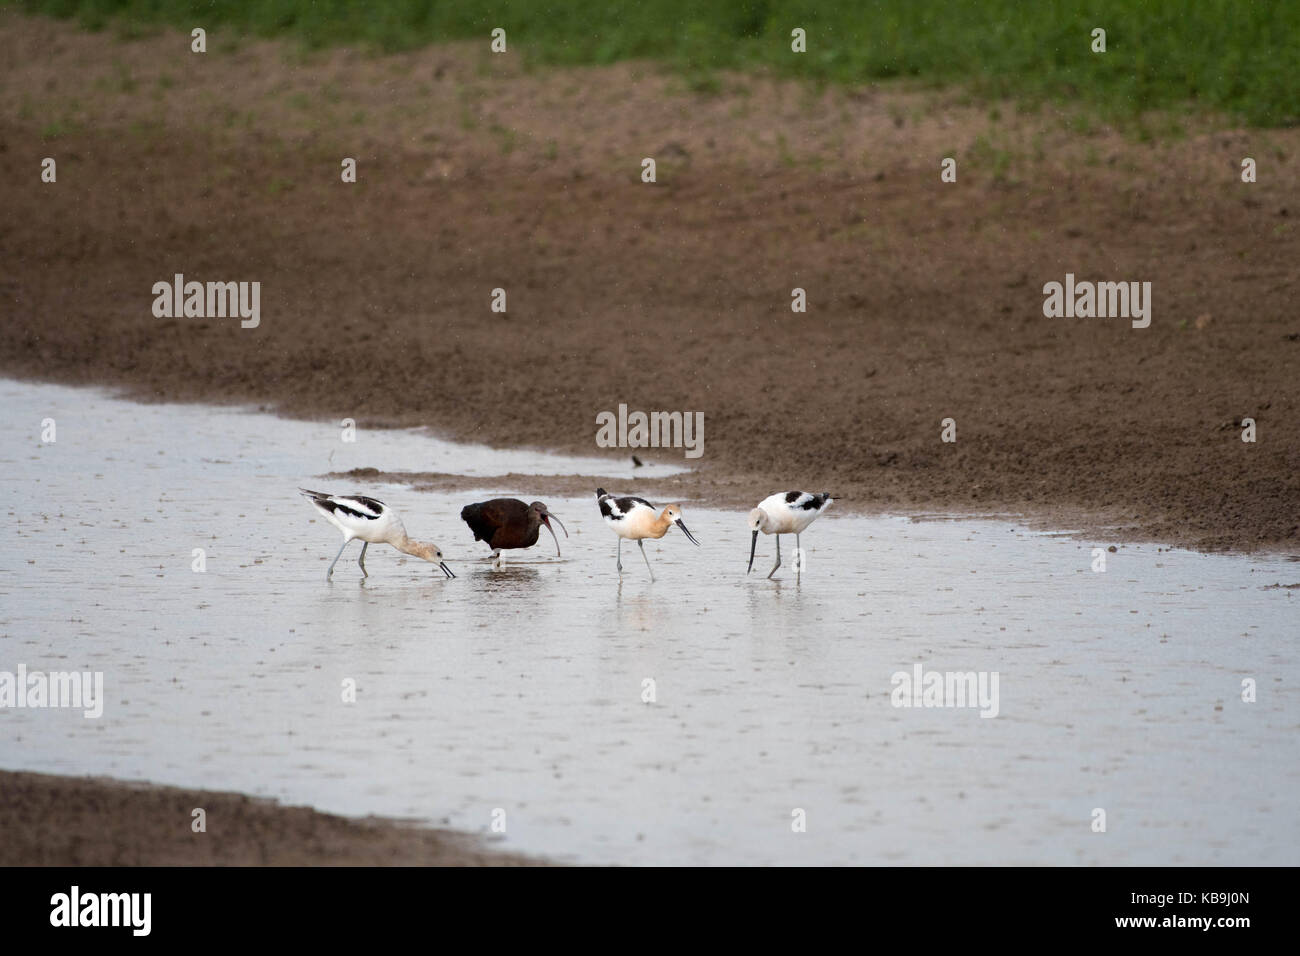 White-faced Ibis, (Plegadis chihi), and American Avocets, (Recurvirostra americana), Bosque del Apache National Wildlife Refuge, New Mexico, USA. Stock Photo